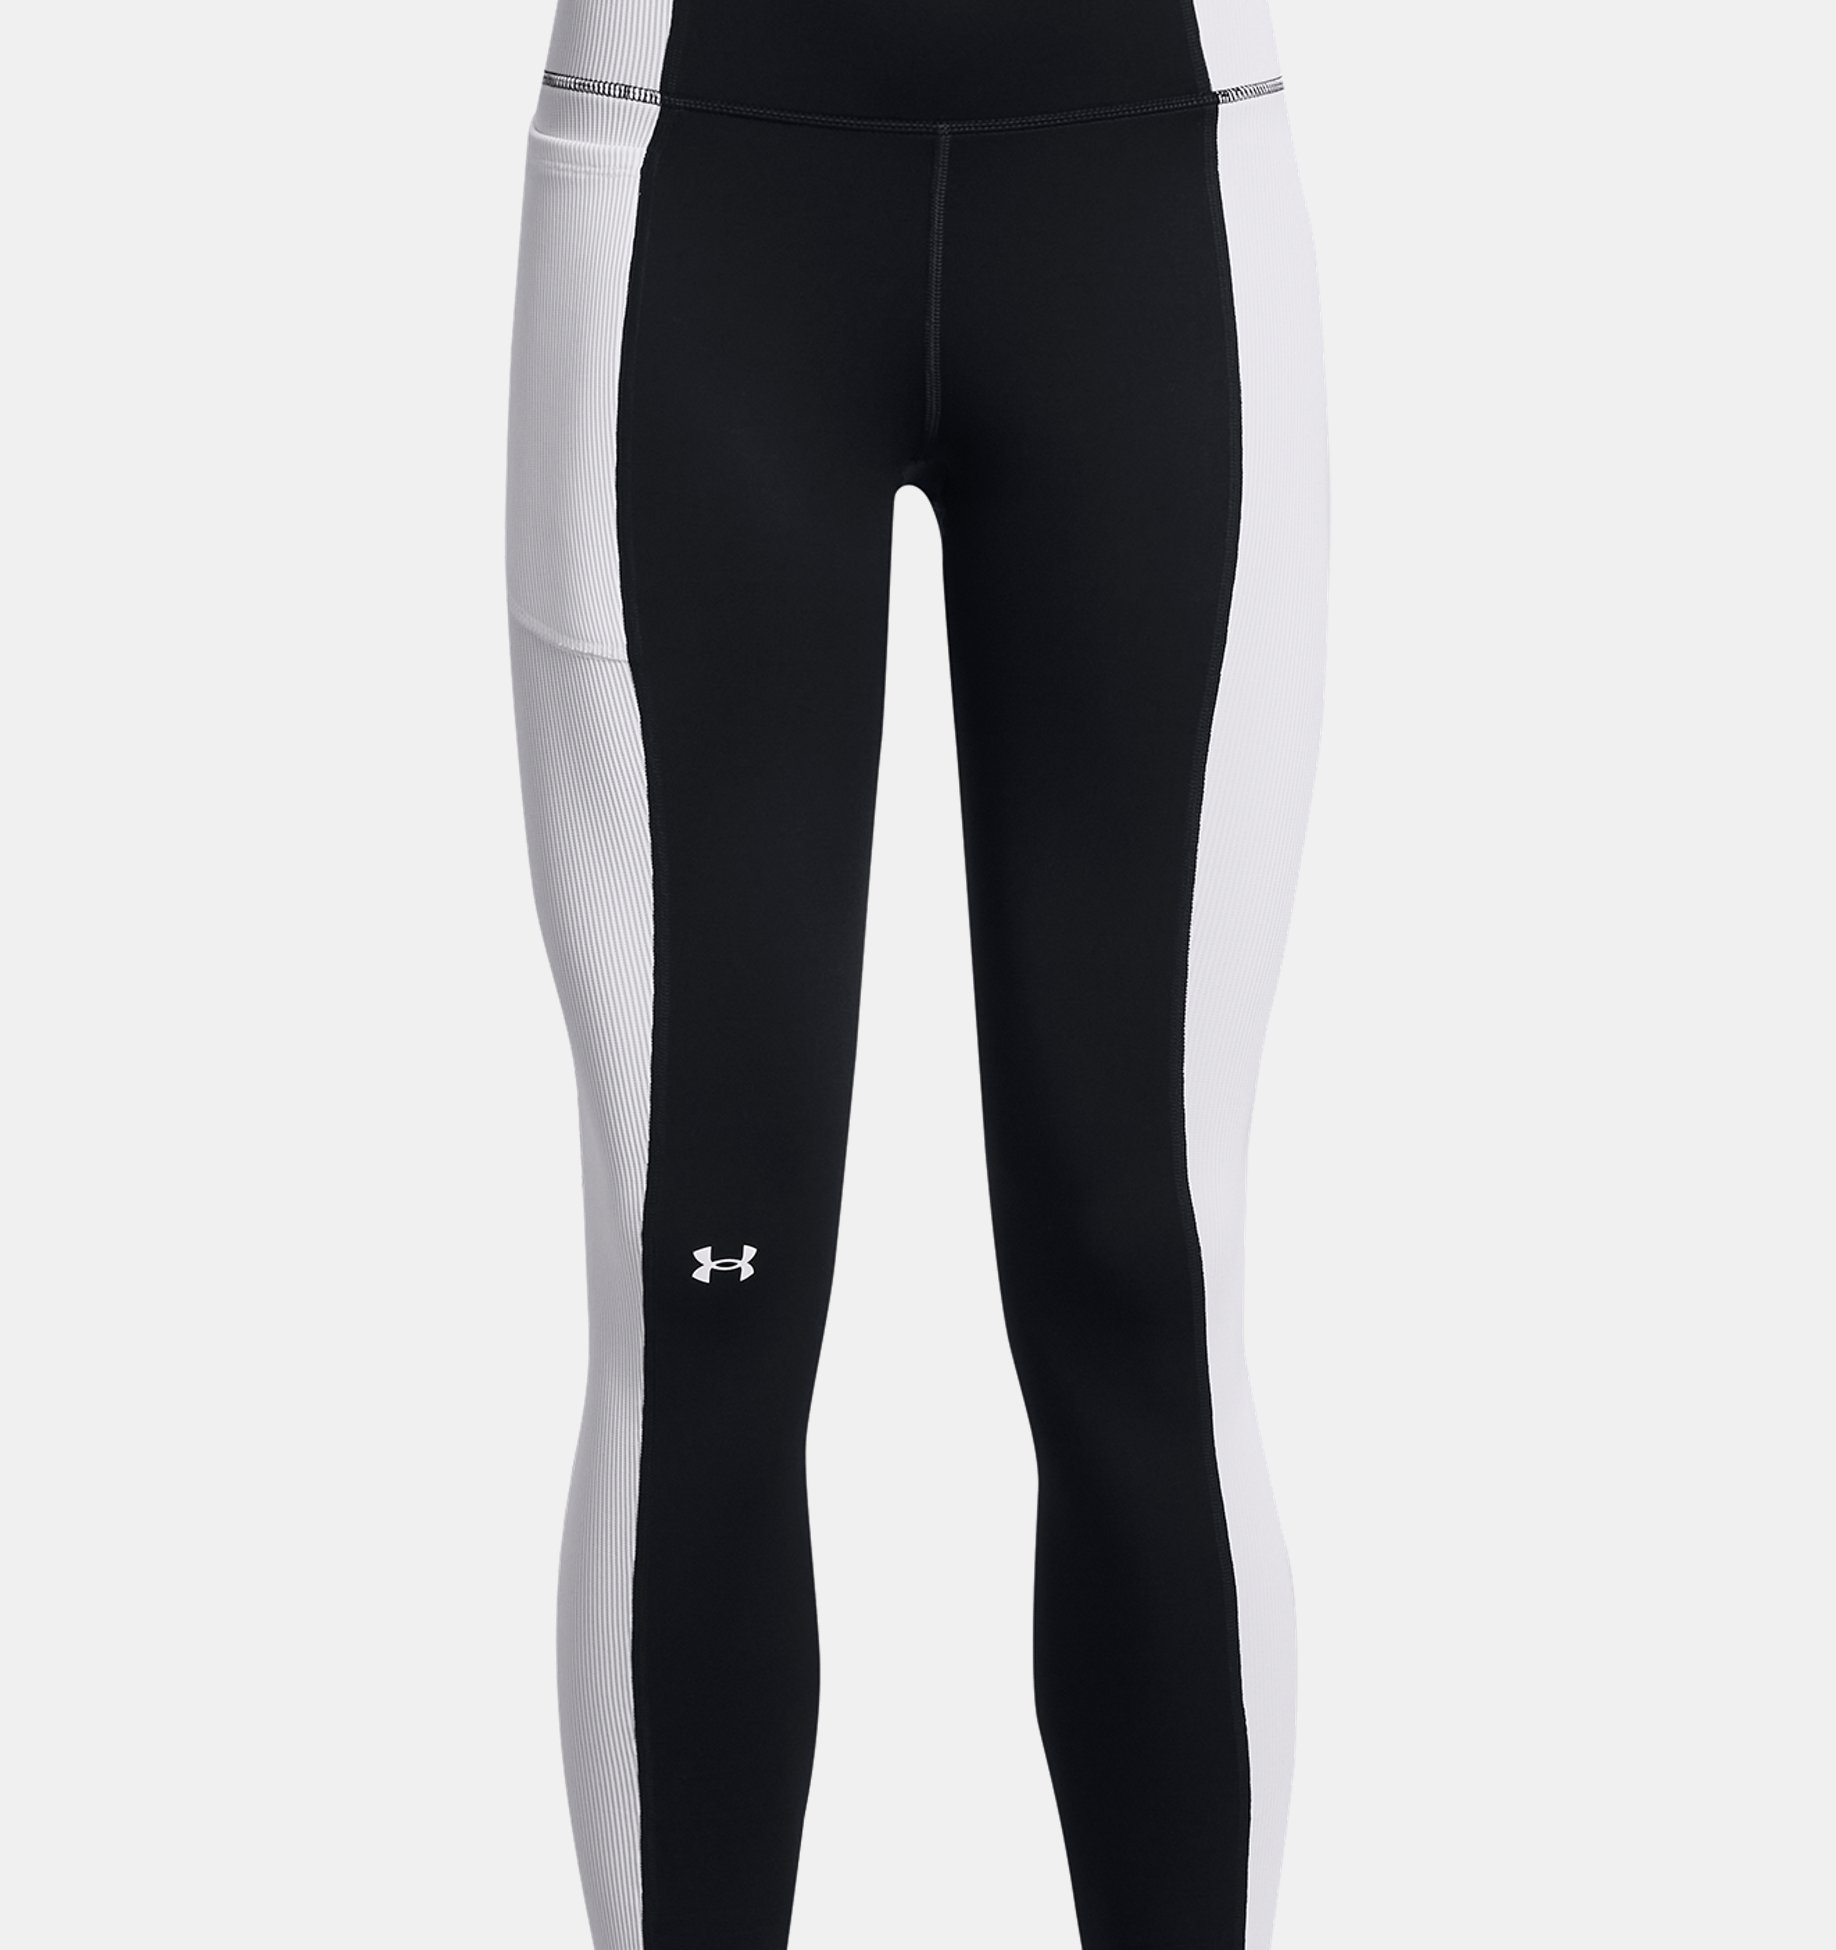 https://underarmour.scene7.com/is/image/Underarmour/PS1379889-001_HF?rp=standard-0pad|pdpZoomDesktop&scl=0.72&fmt=jpg&qlt=85&resMode=sharp2&cache=on,on&bgc=f0f0f0&wid=1836&hei=1950&size=1500,1500